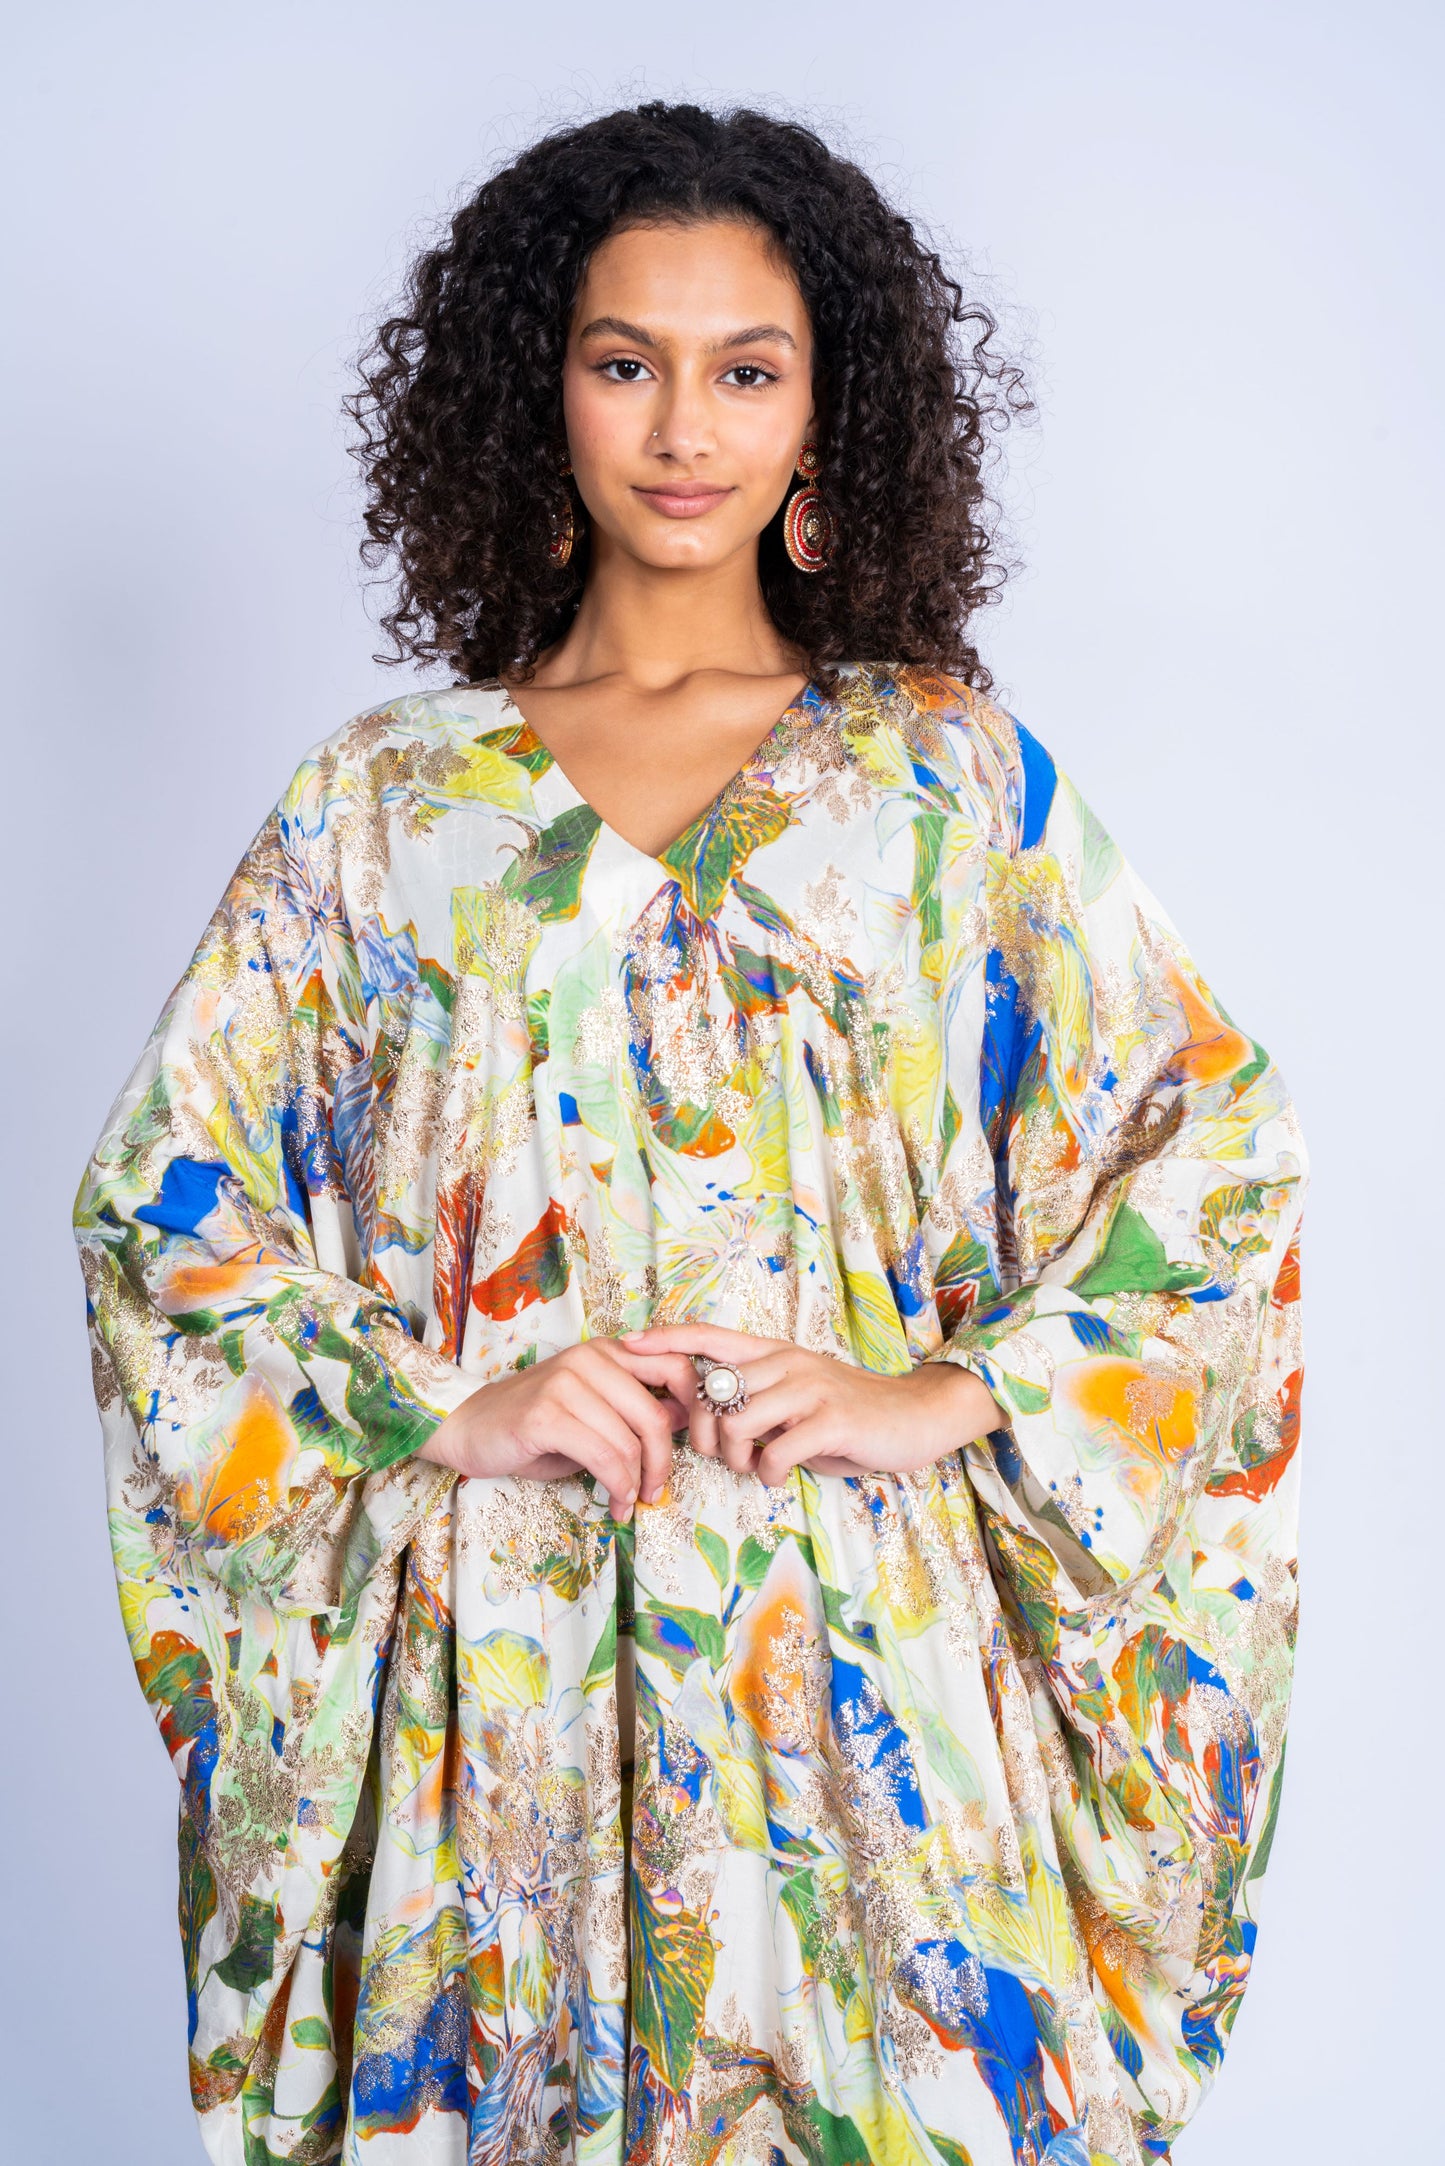 A dress made of silk, with a wide cut and a print in a variety of colors.